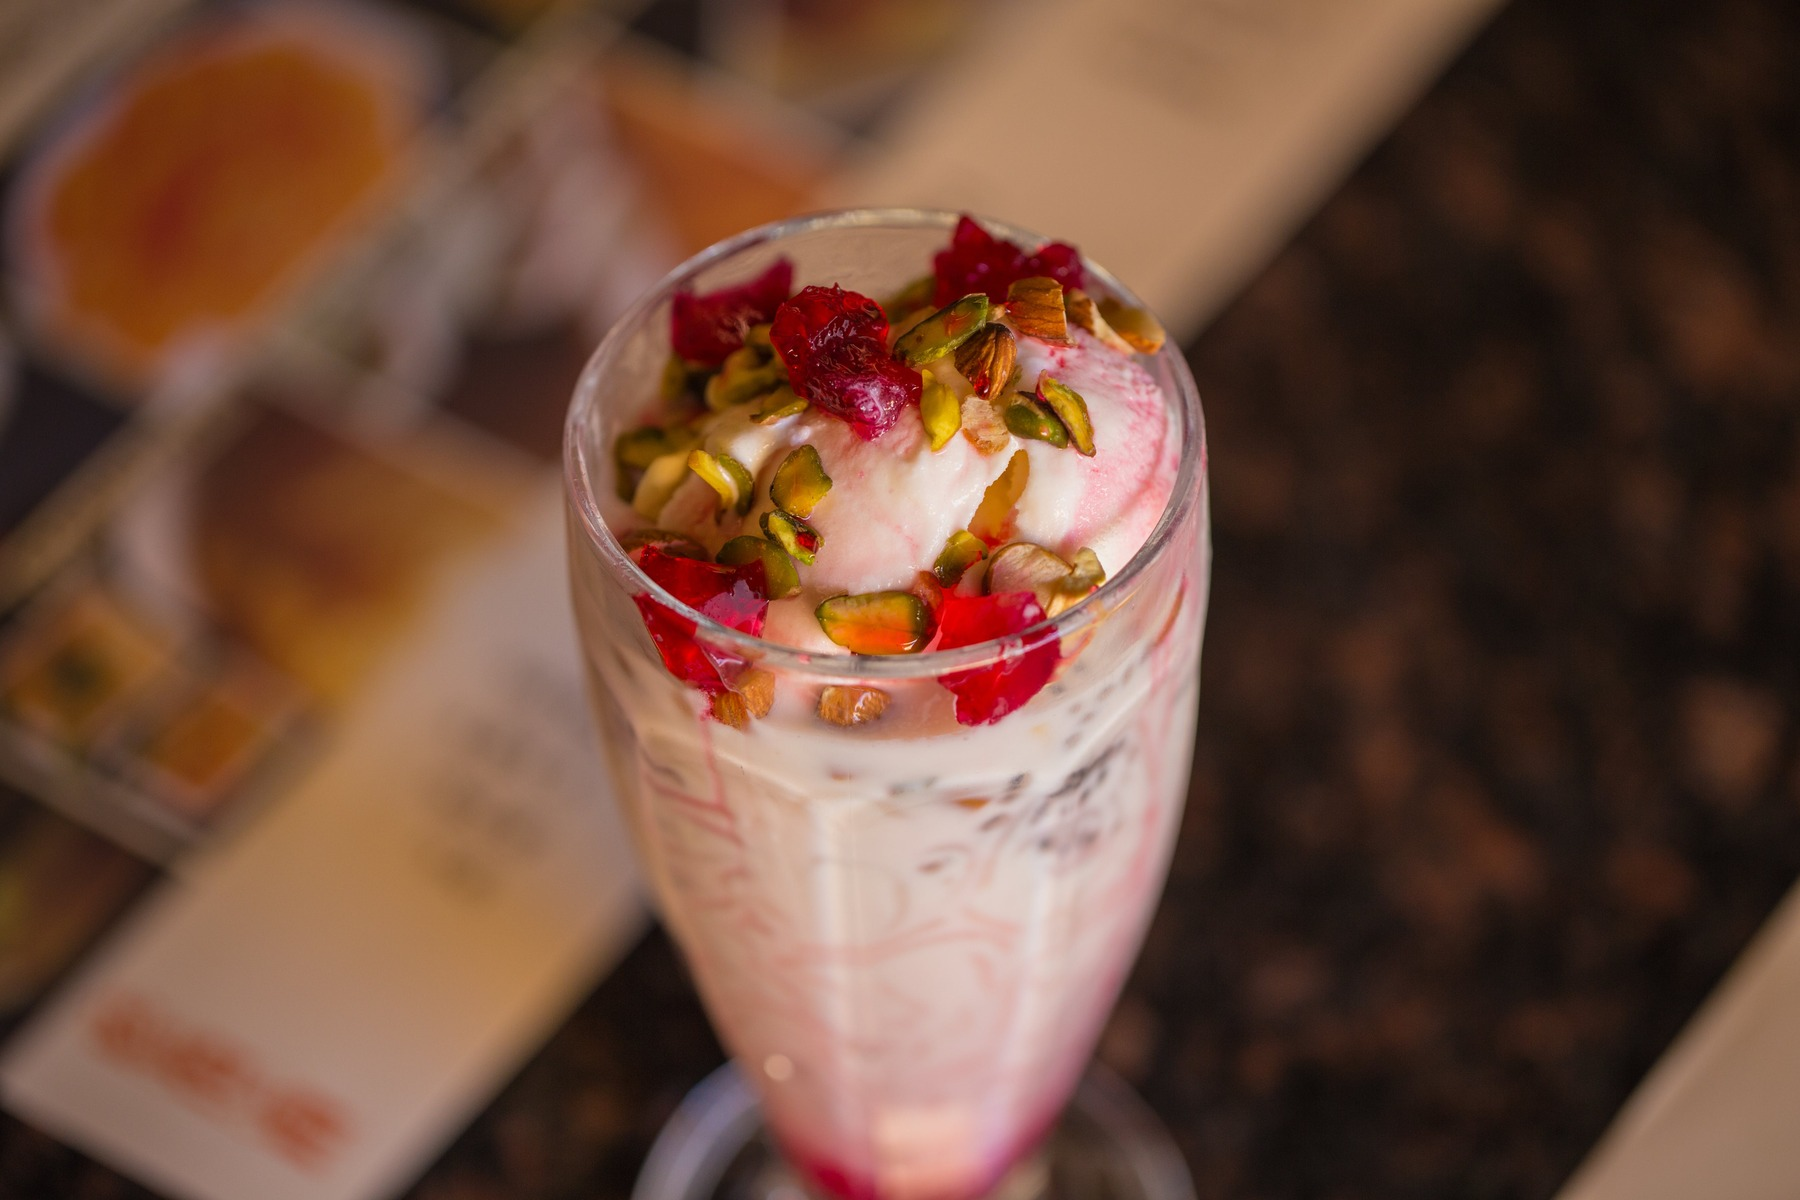 Irresistible Falooda Cold Drink - A refreshing blend of flavors and textures in every sip